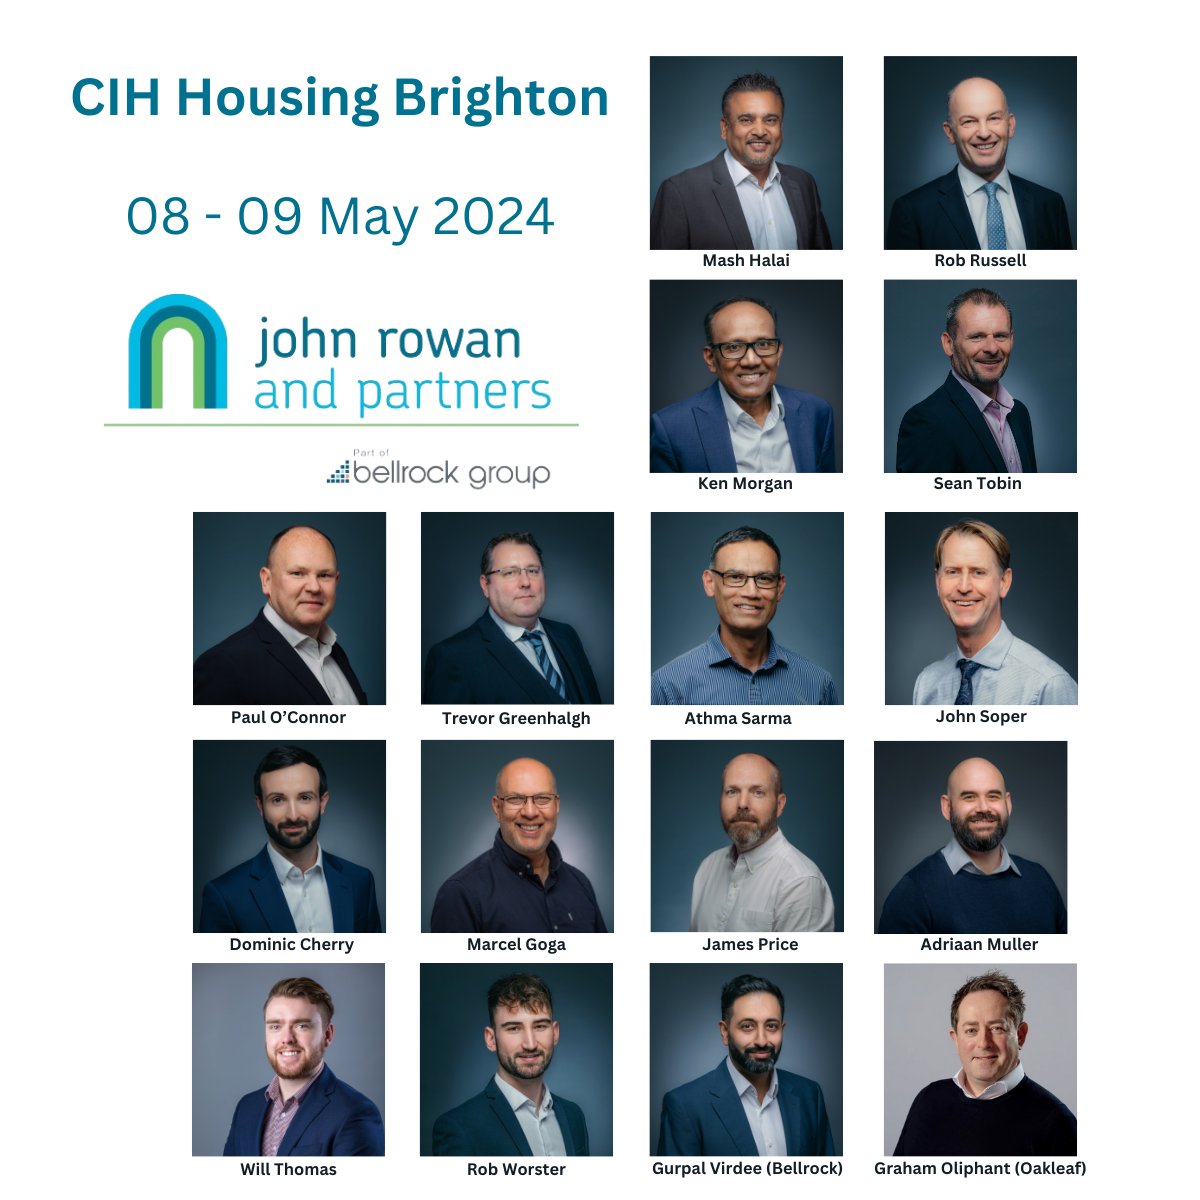 Some of our team will be in Brighton for the @CIHhousing conference. Please get in touch to meet with them and find out how we can work together.

#cihbrighton #housingbrighton #housing #housingindustry #construction #constructionindustry #networking